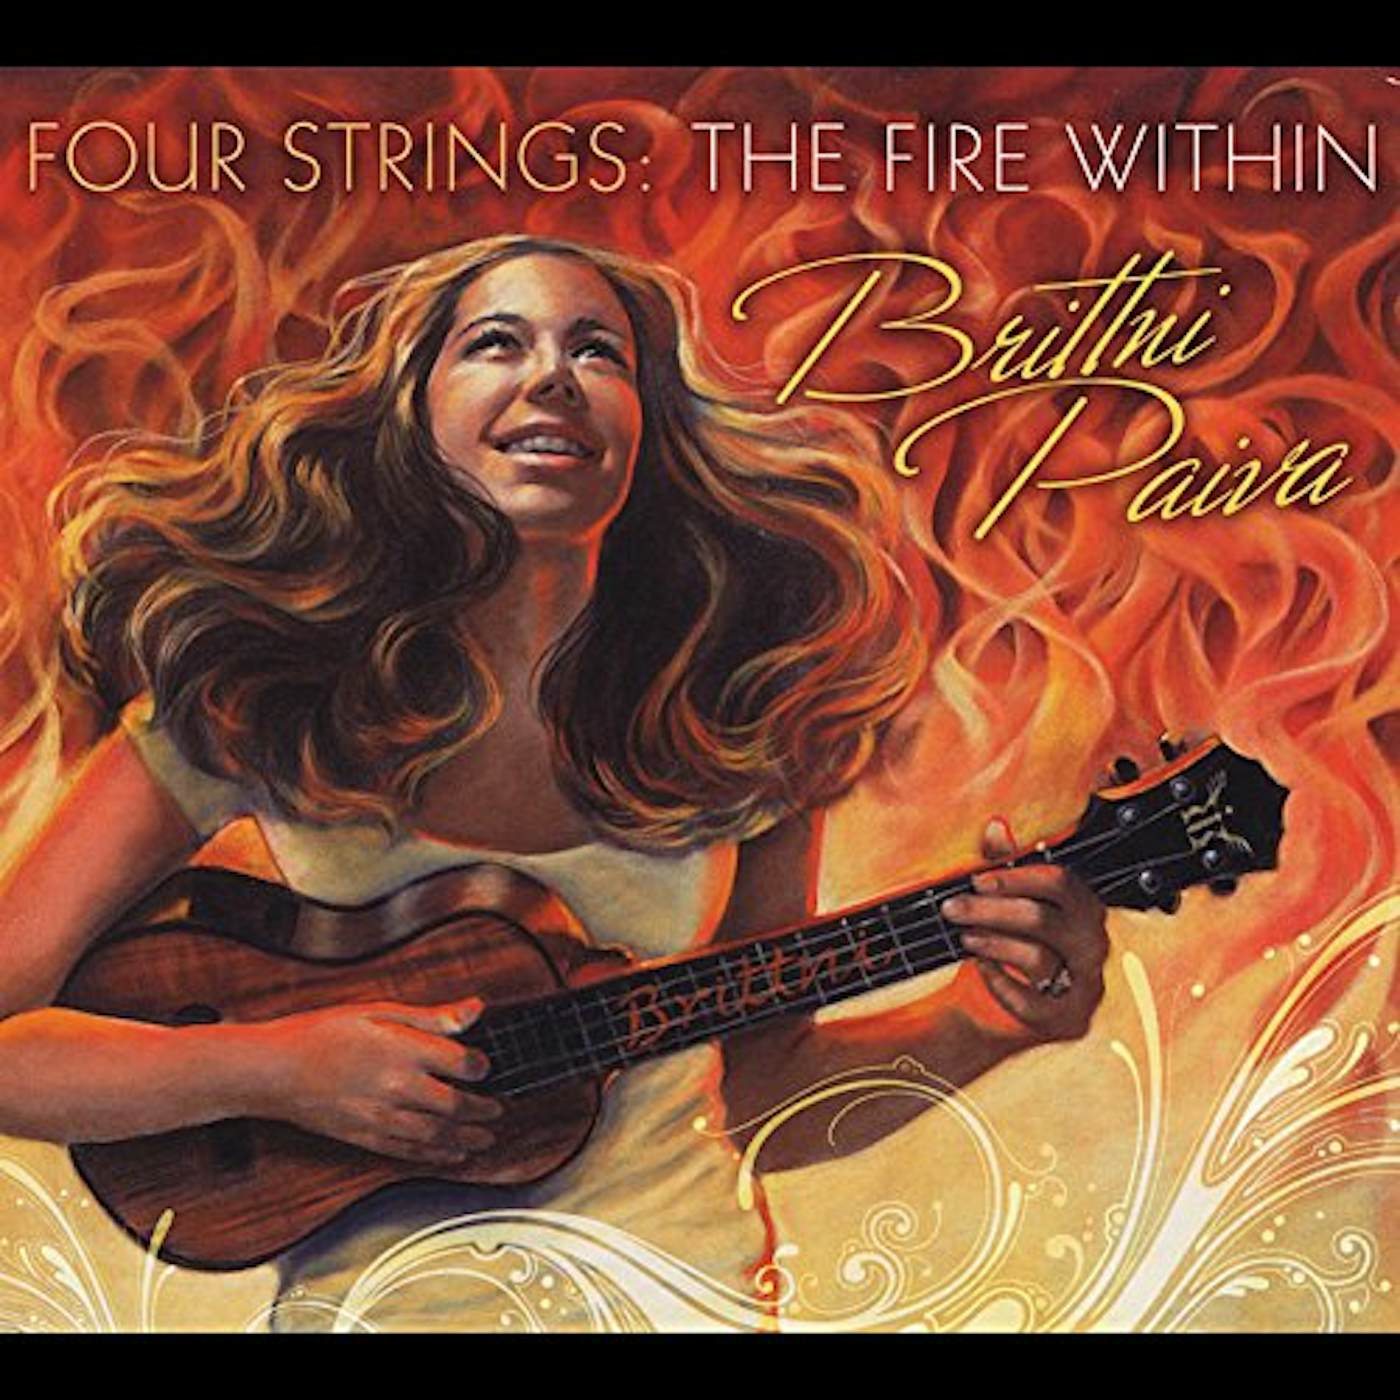 Brittni Paiva FOUR STRINGS: THE FIRE WITHIN CD